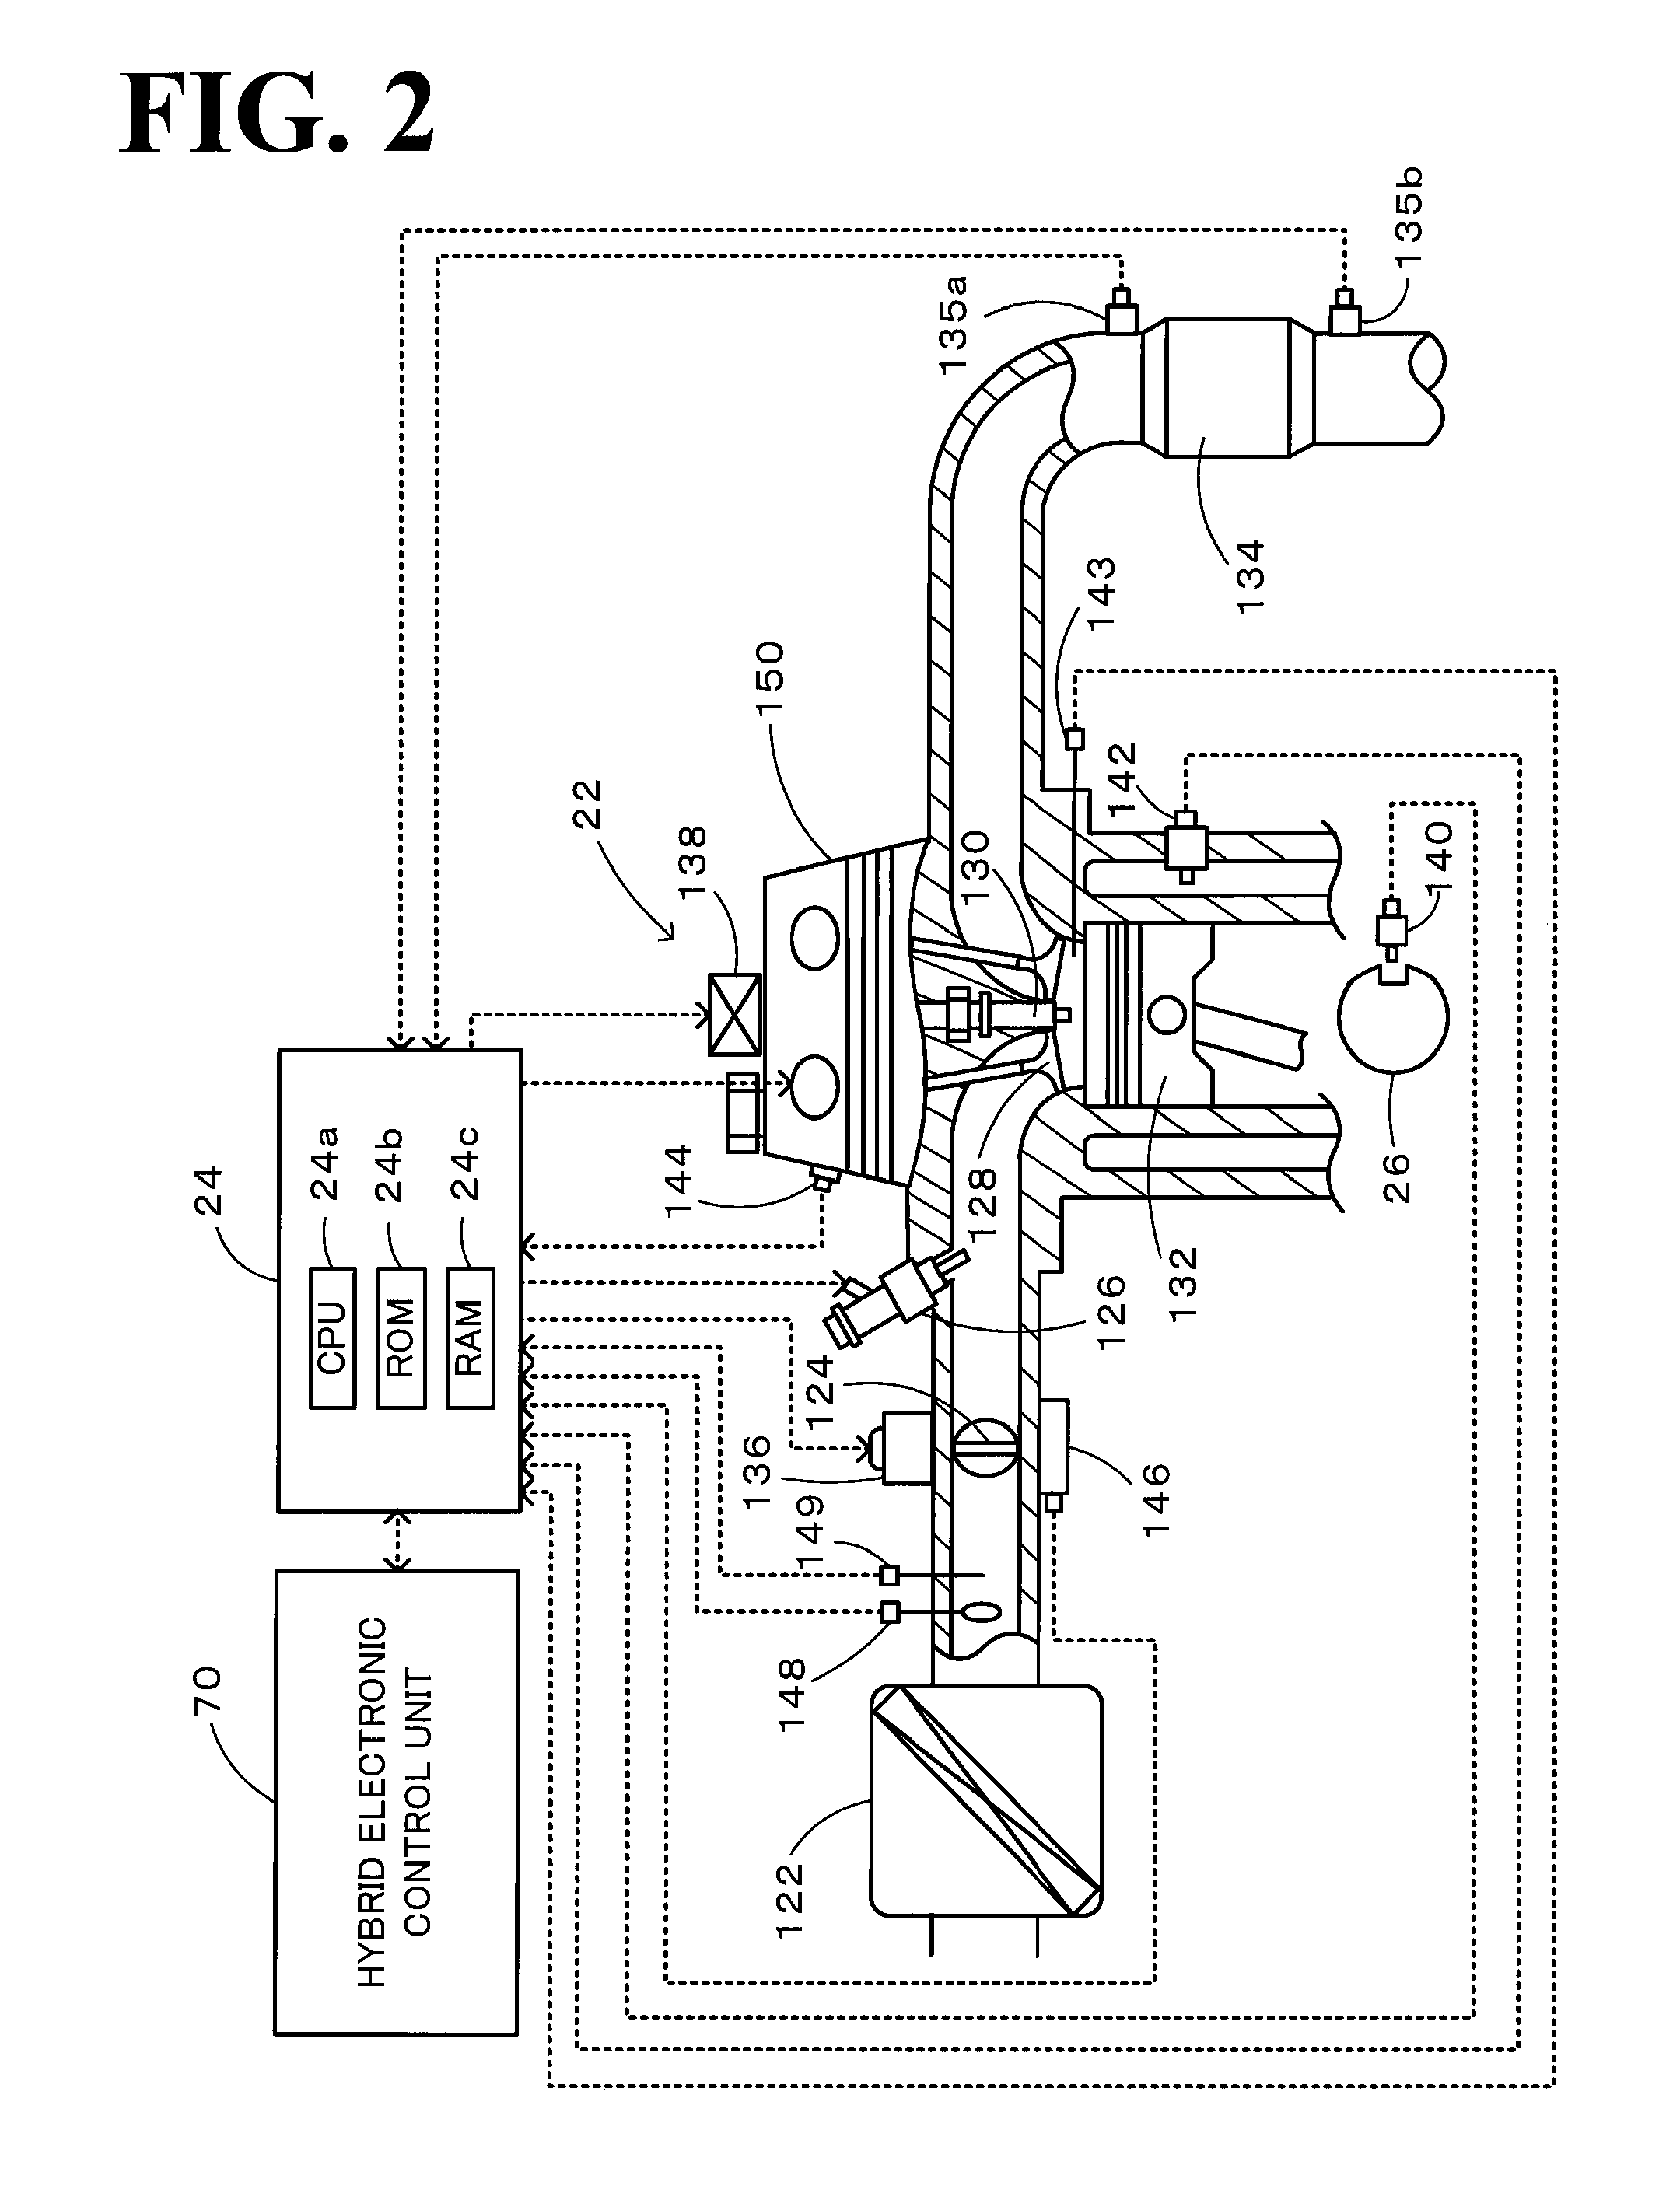 Power output apparatus, internal combustion engine system, and control methods thereof